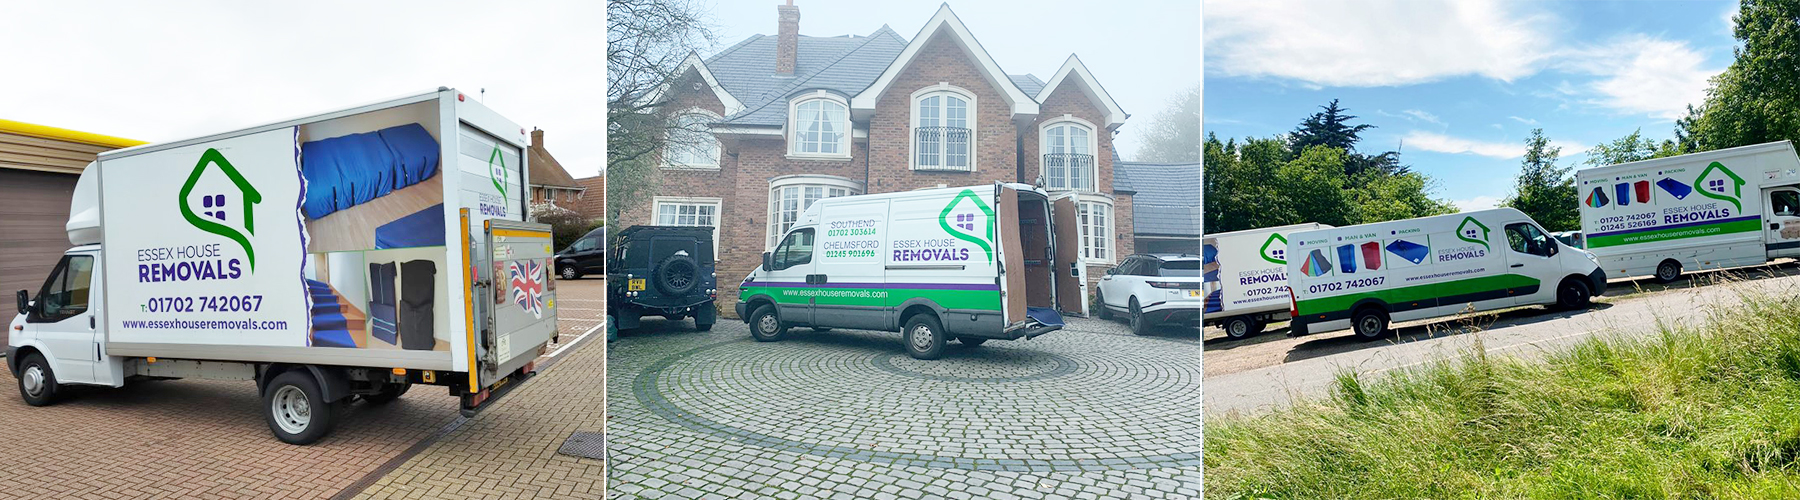 Essex House Removals Romford